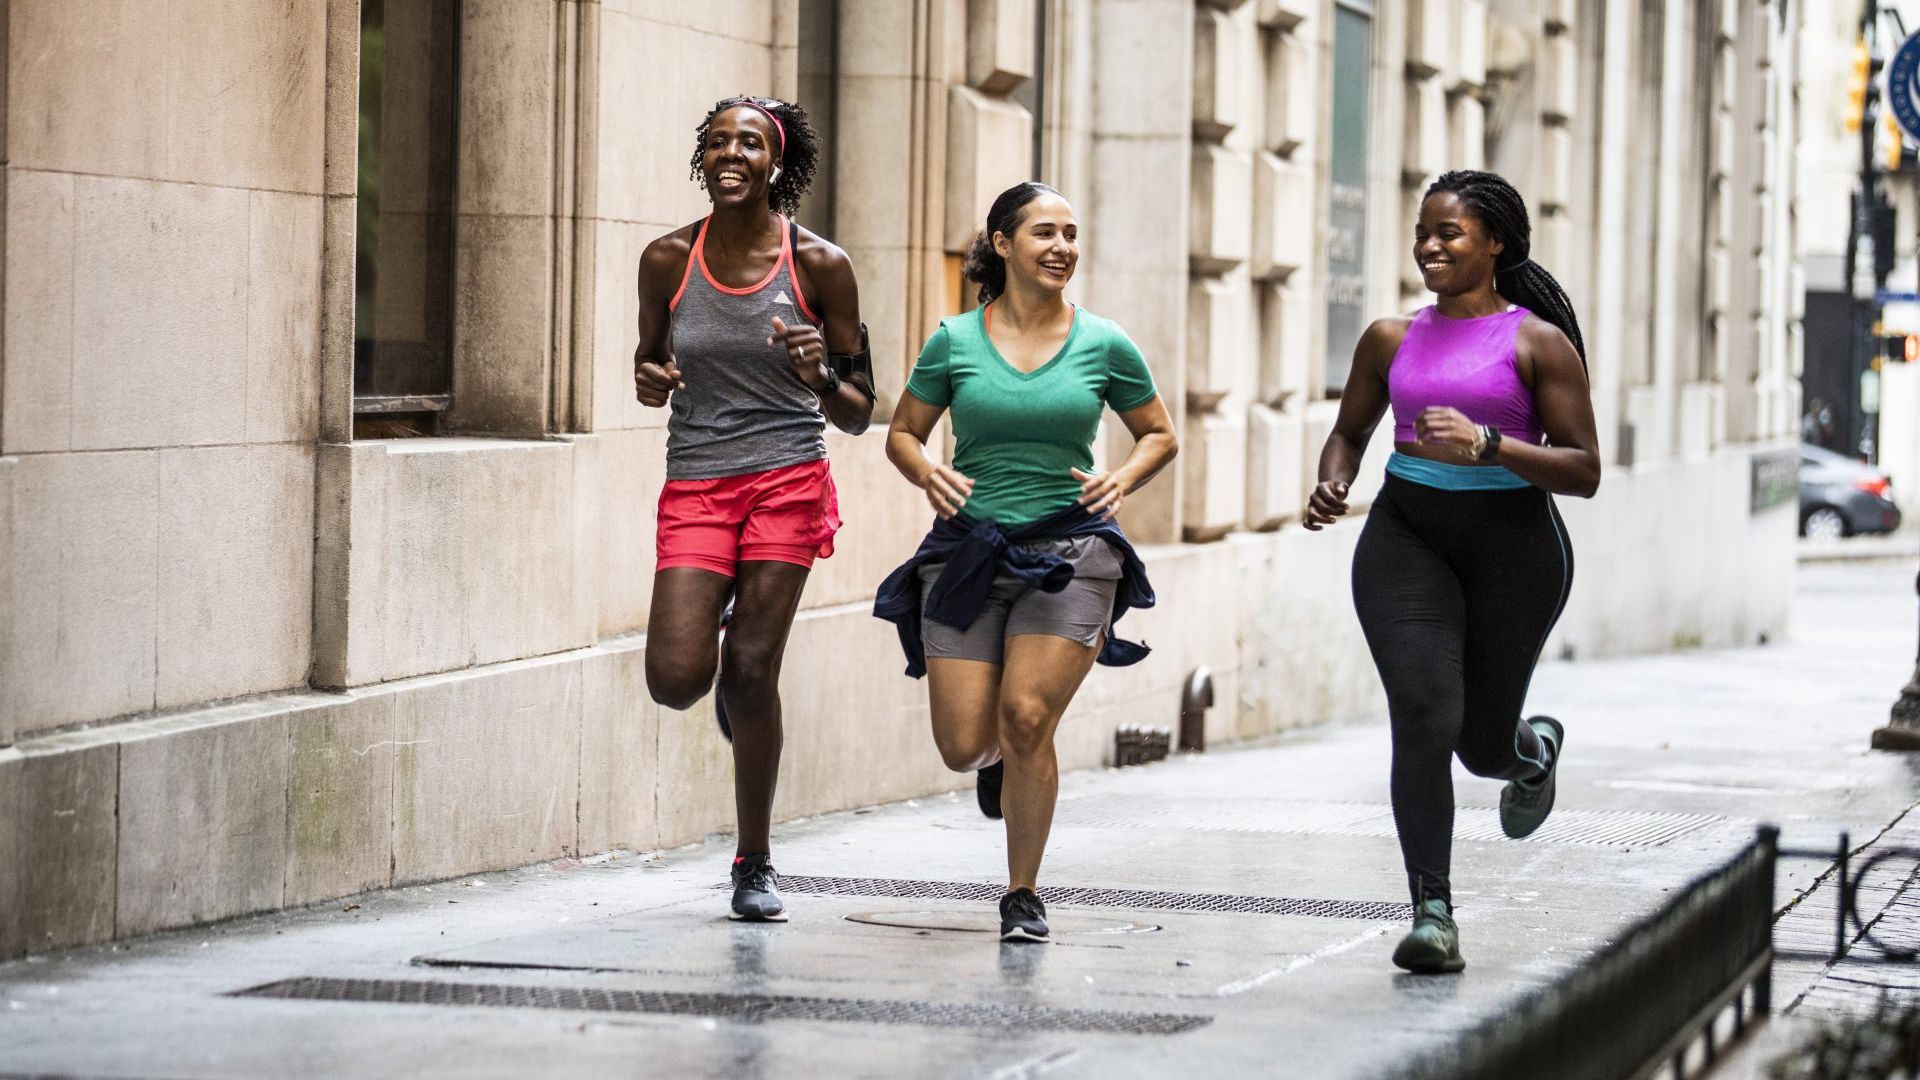 Research finds running in the wrong sized sports bra shortens your